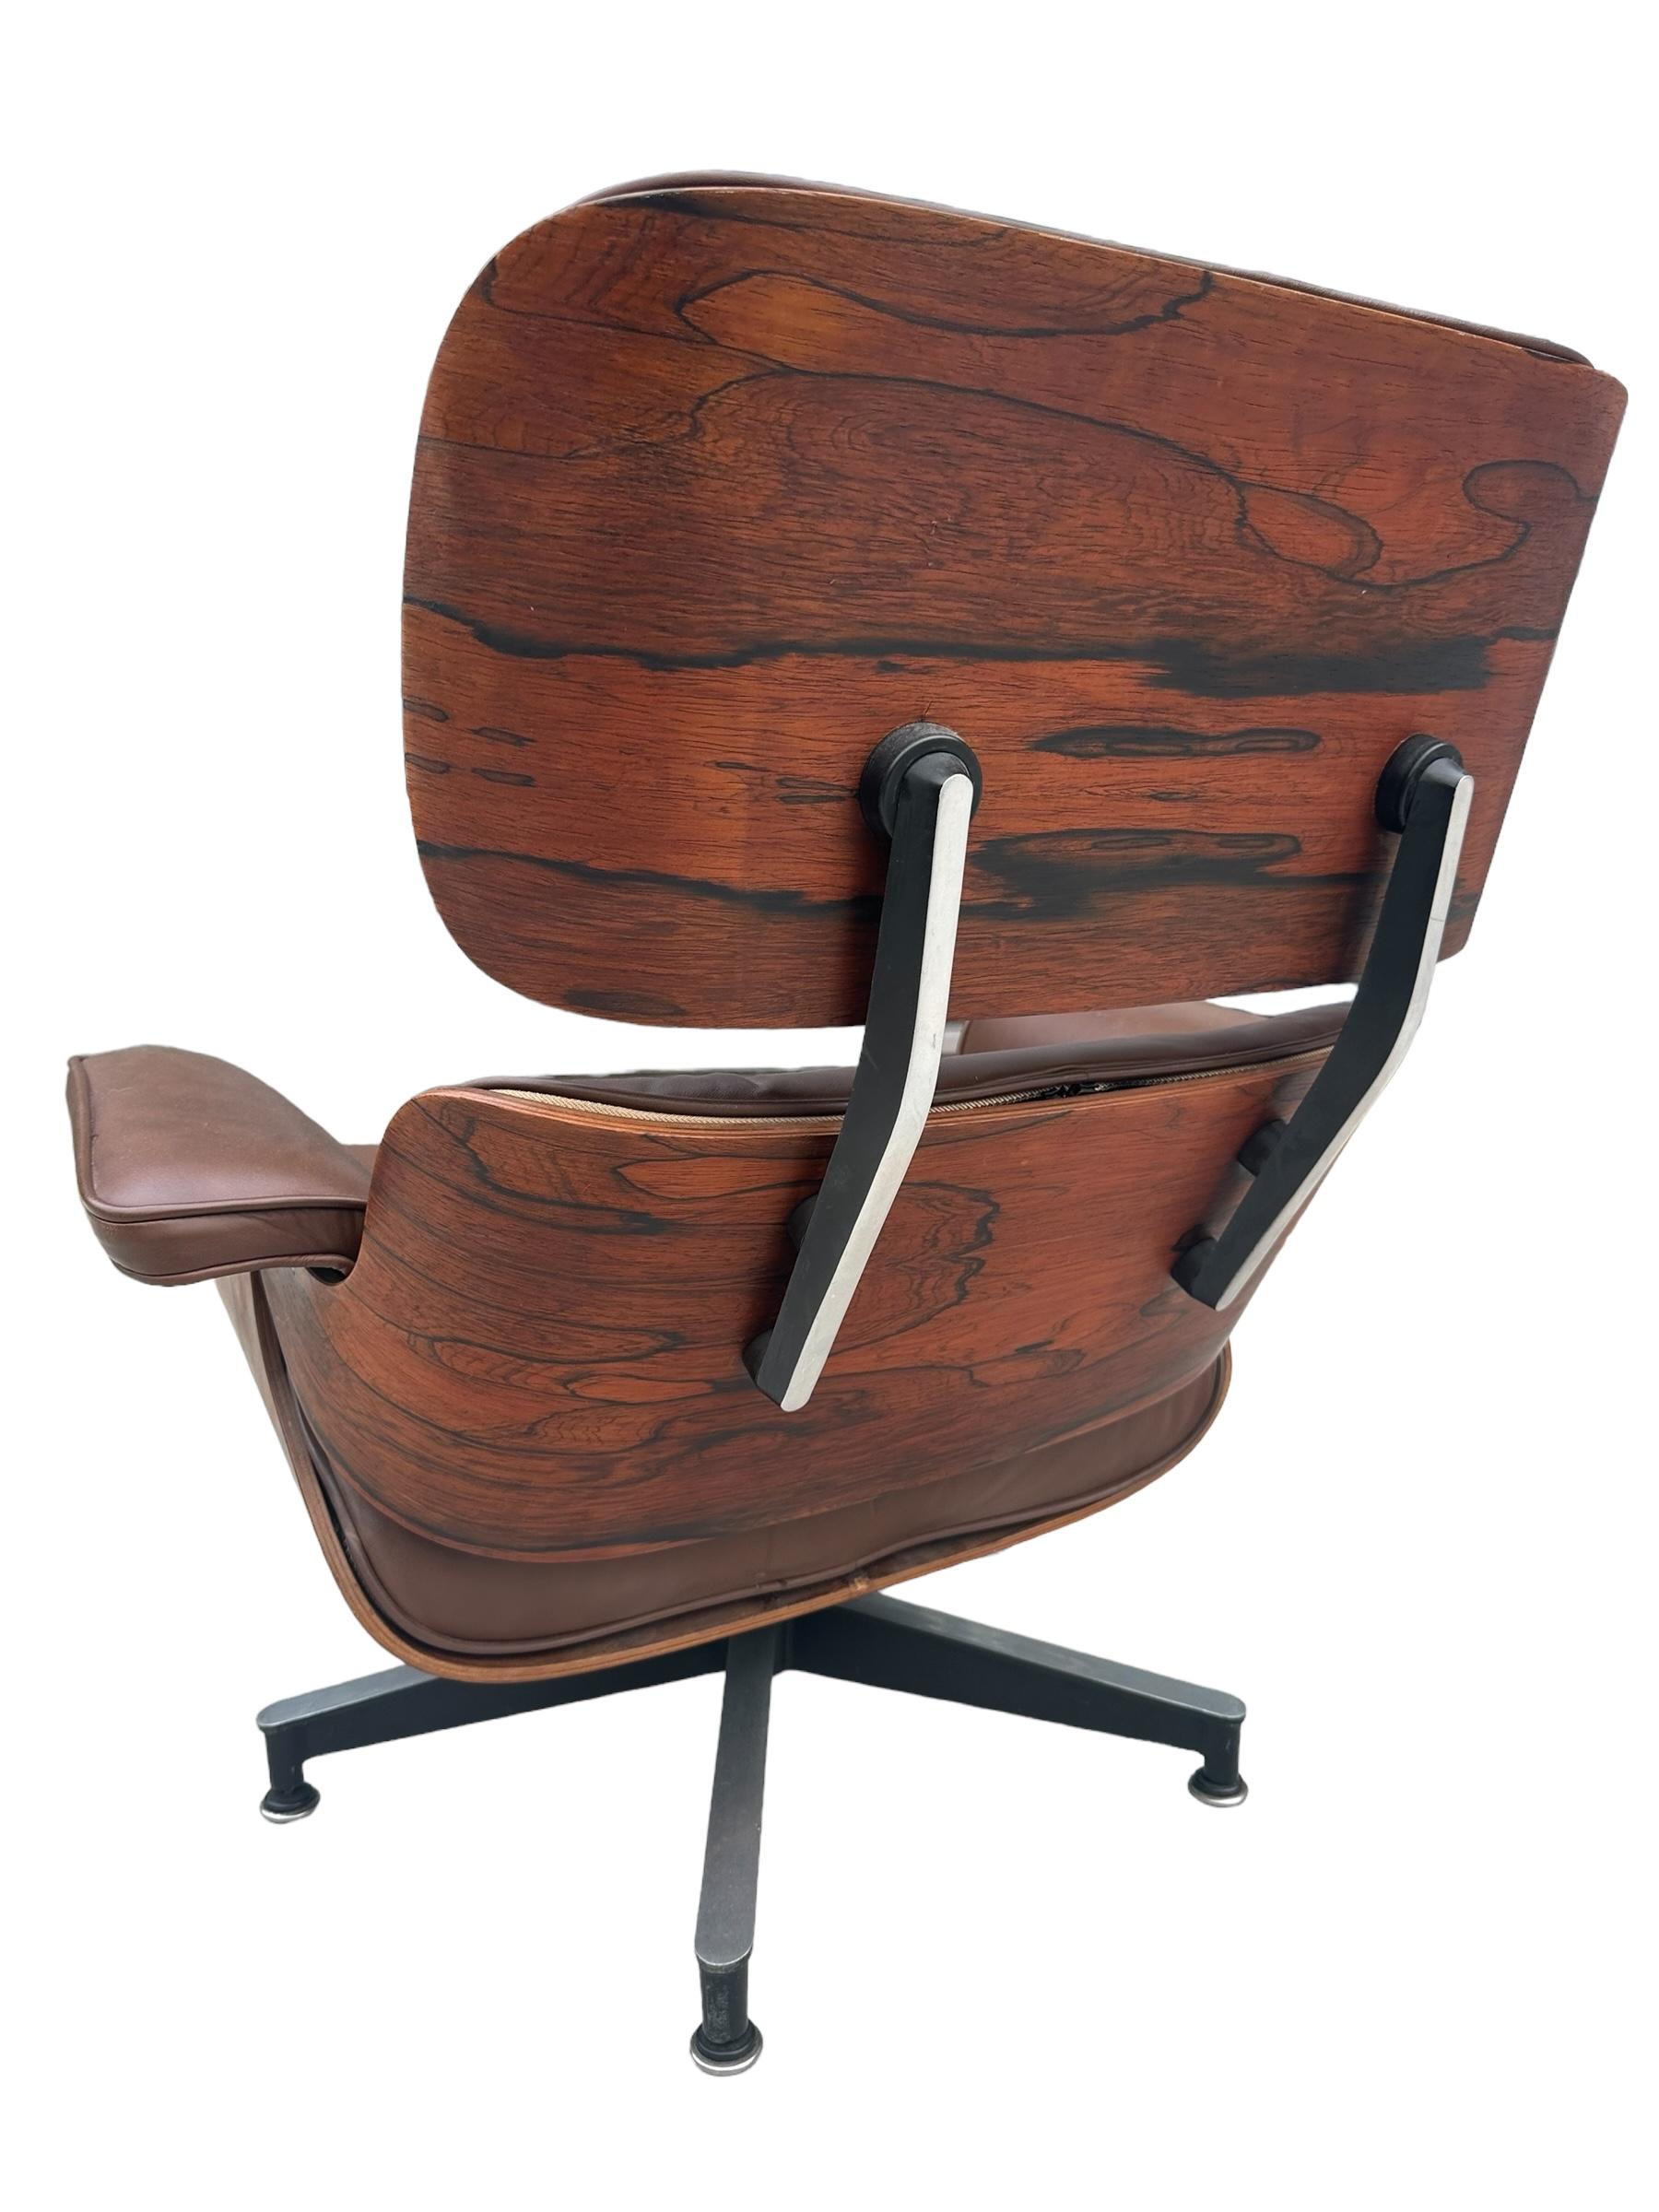 Restored Eames Herman Miller Lounge Chair and Ottoman In Good Condition For Sale In Brooklyn, NY